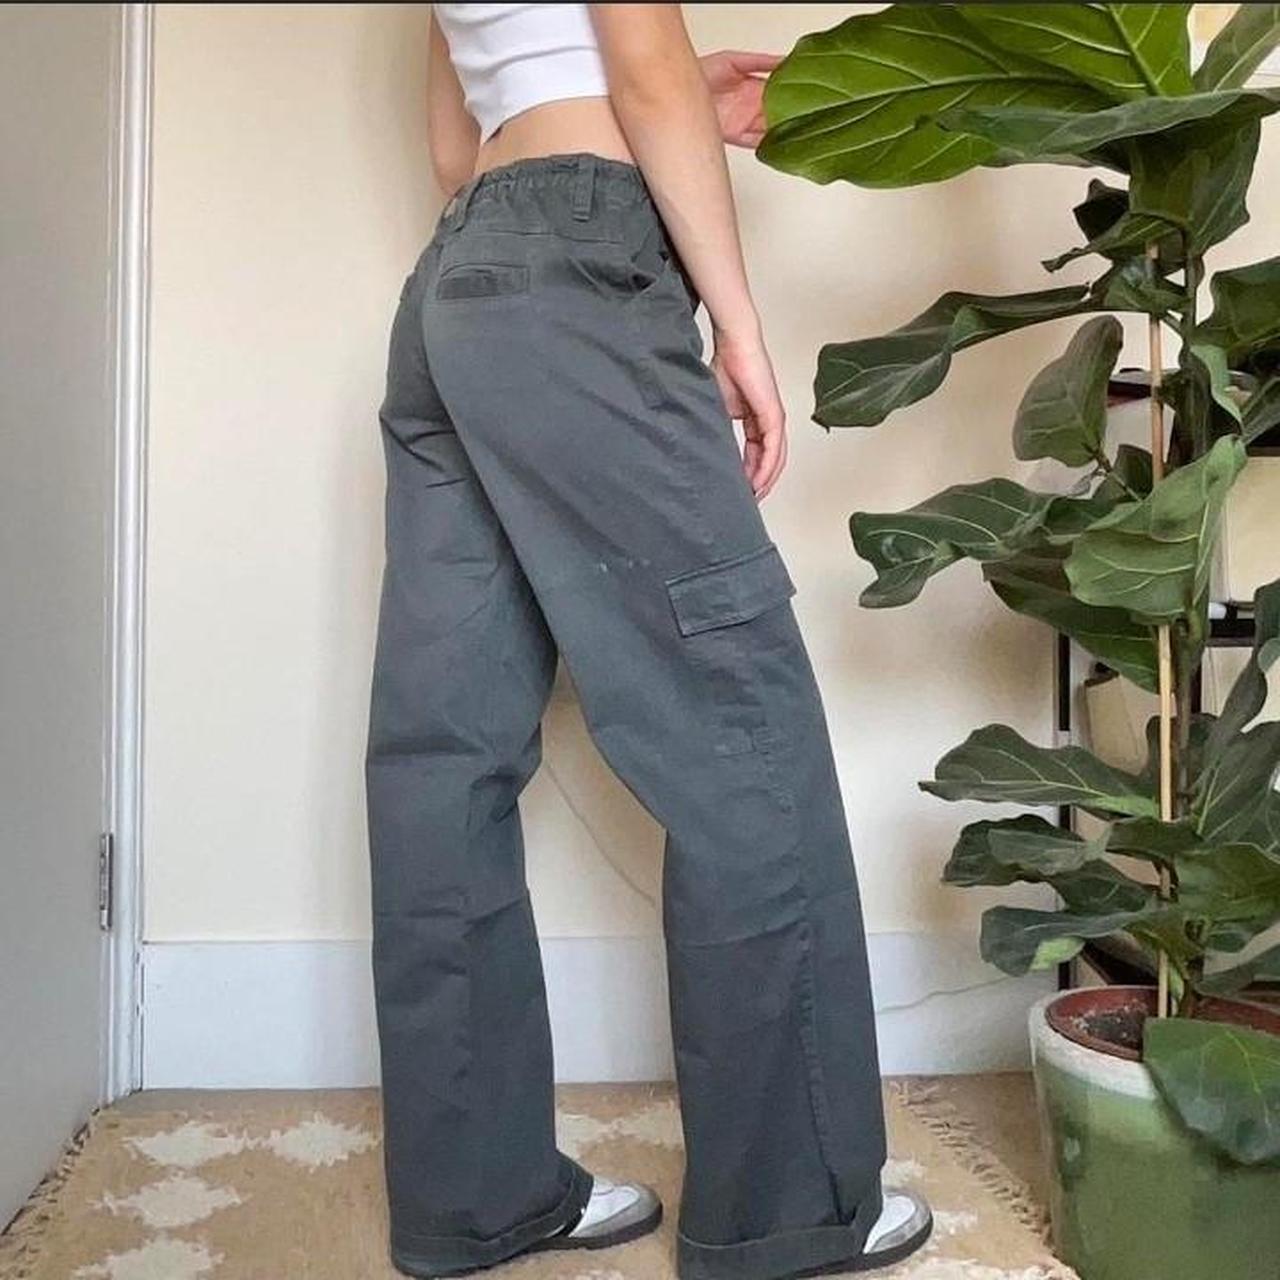 Subdued green/grey cargo pants, low rise baggy fit - Depop